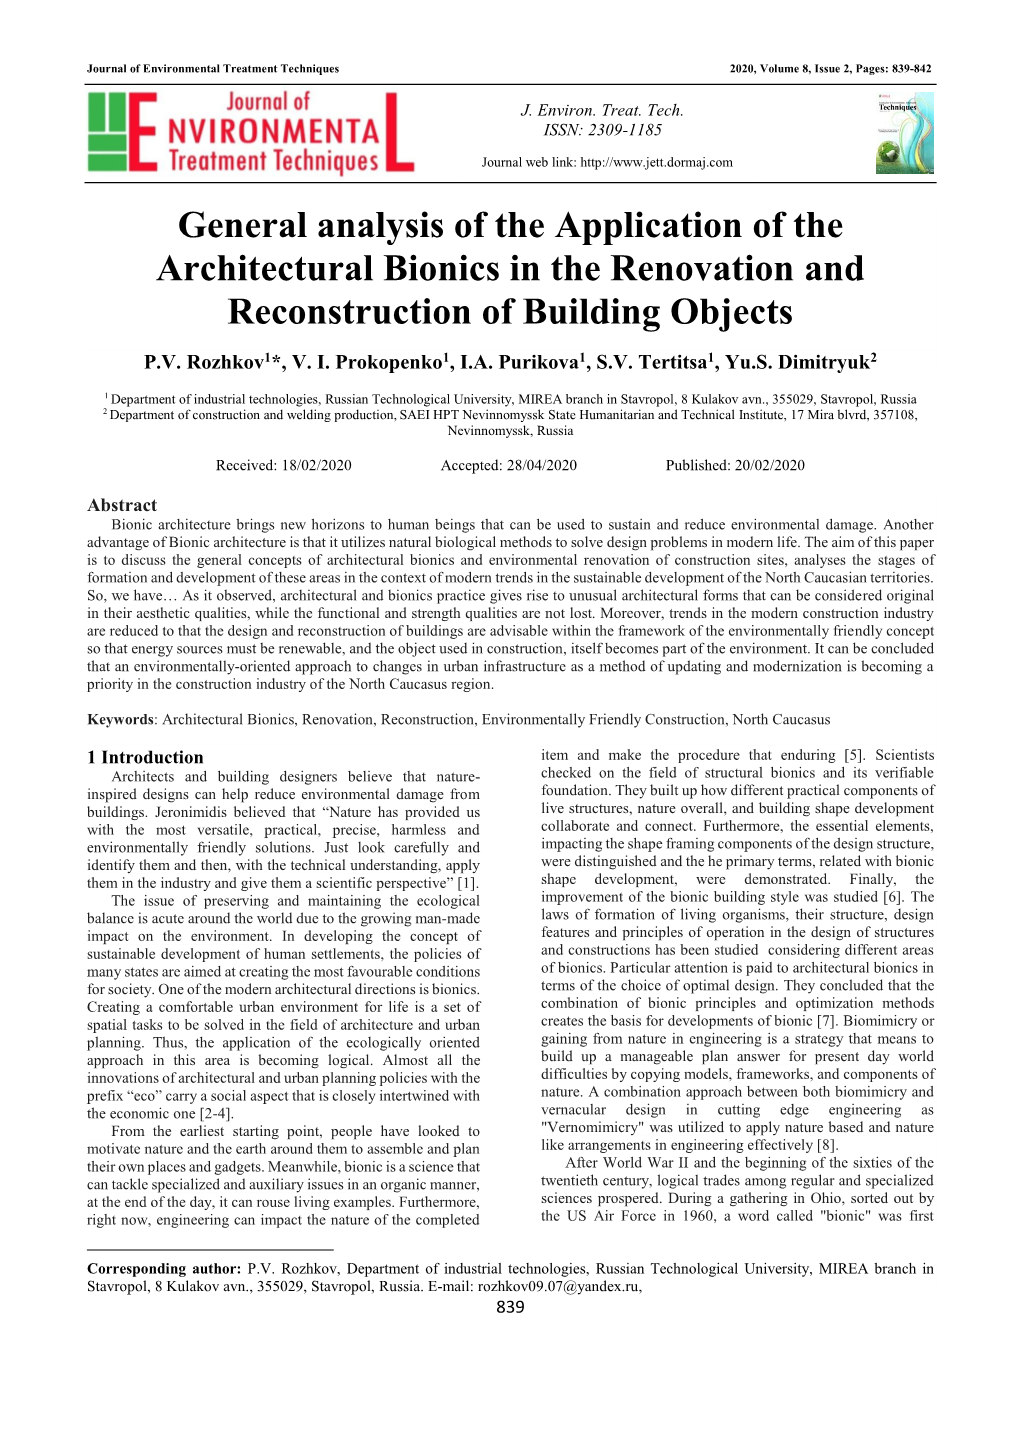 General Analysis of the Application of the Architectural Bionics in the Renovation and Reconstruction of Building Objects